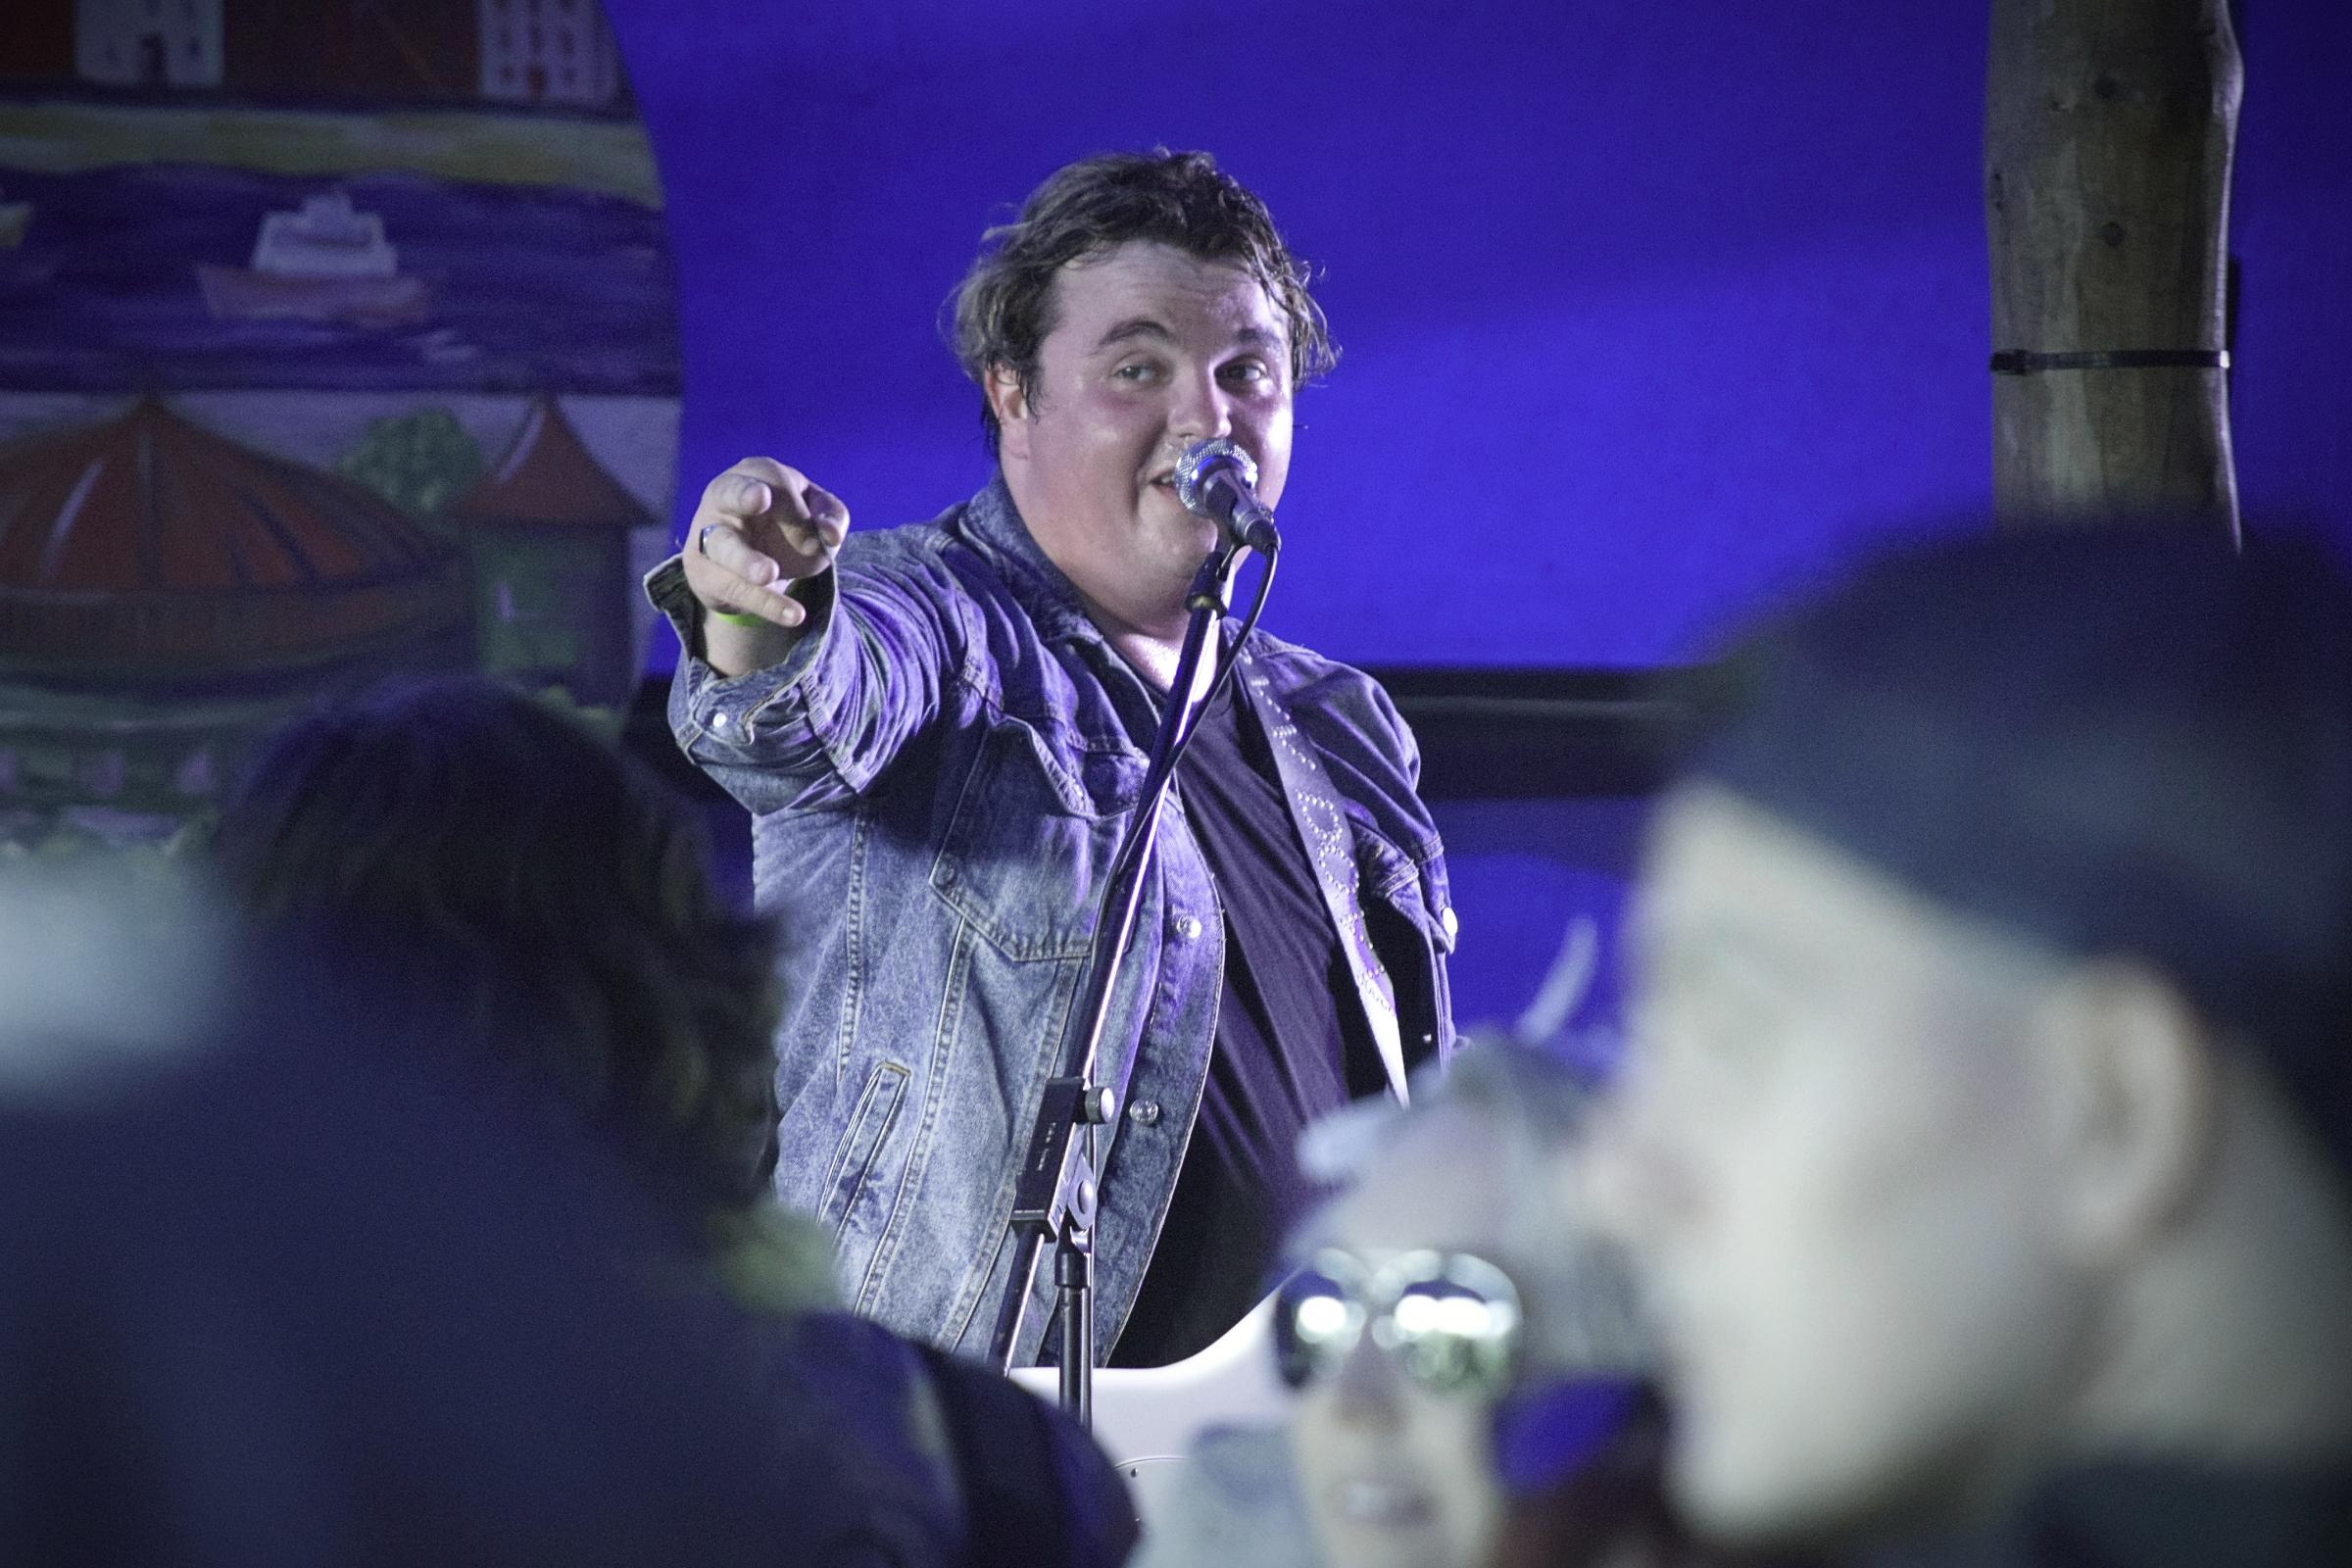 Dovv performing at Bute Fest. Picture by Iain Smith/The Weekender